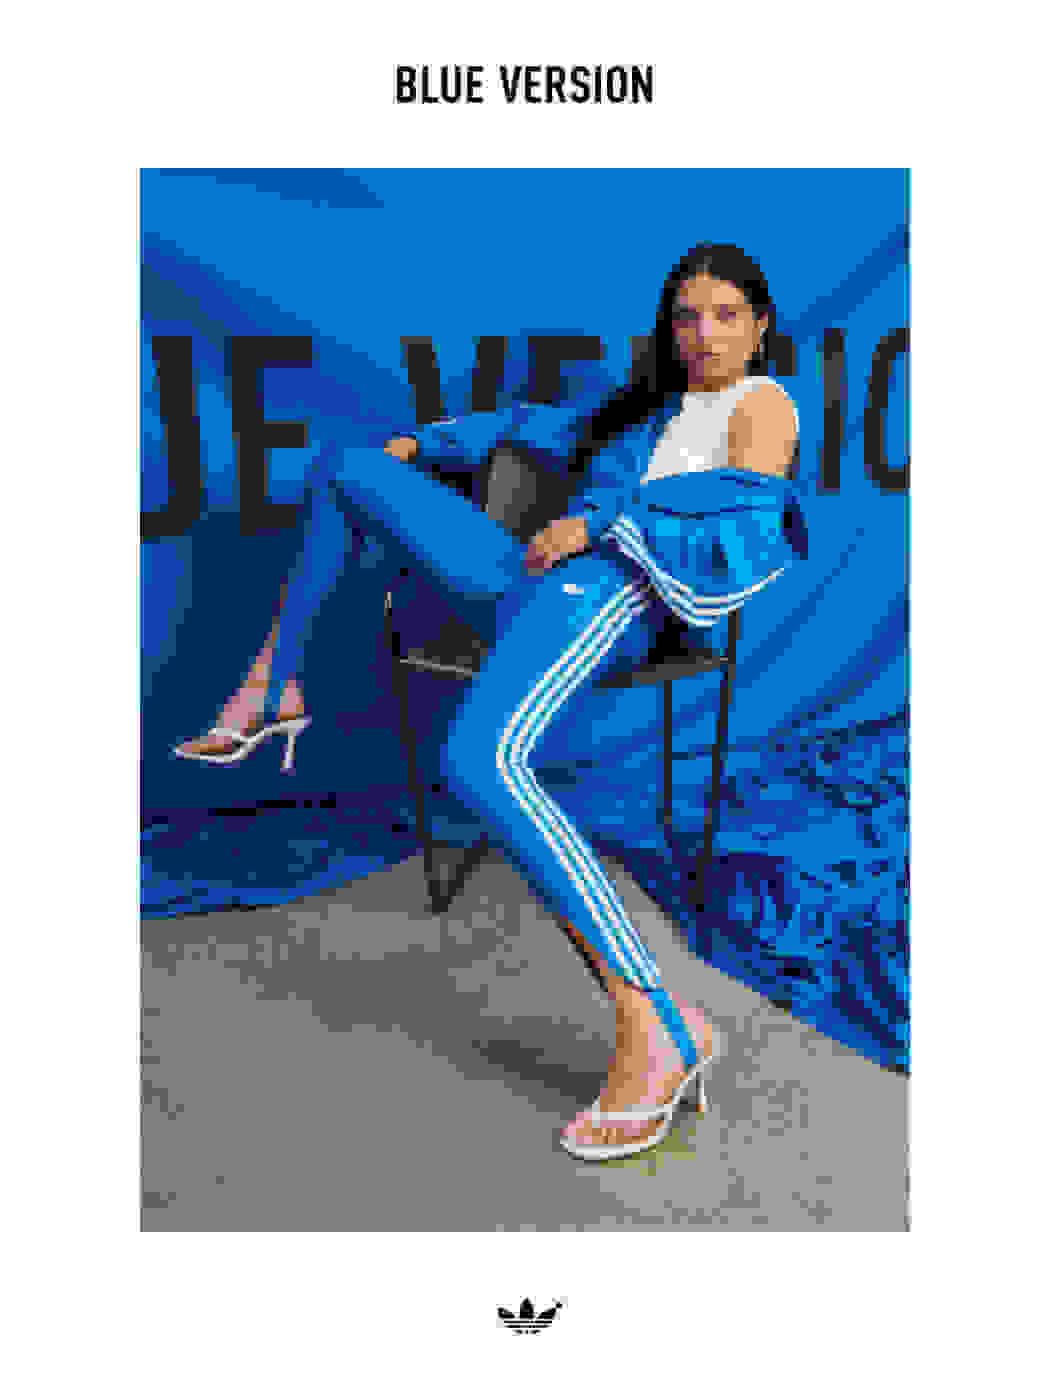 An image of Ganna Bogdan striking a pose on a chair wearing the Blue Version Beckenbauer tracksuit in bluebird and a pair of high heels.